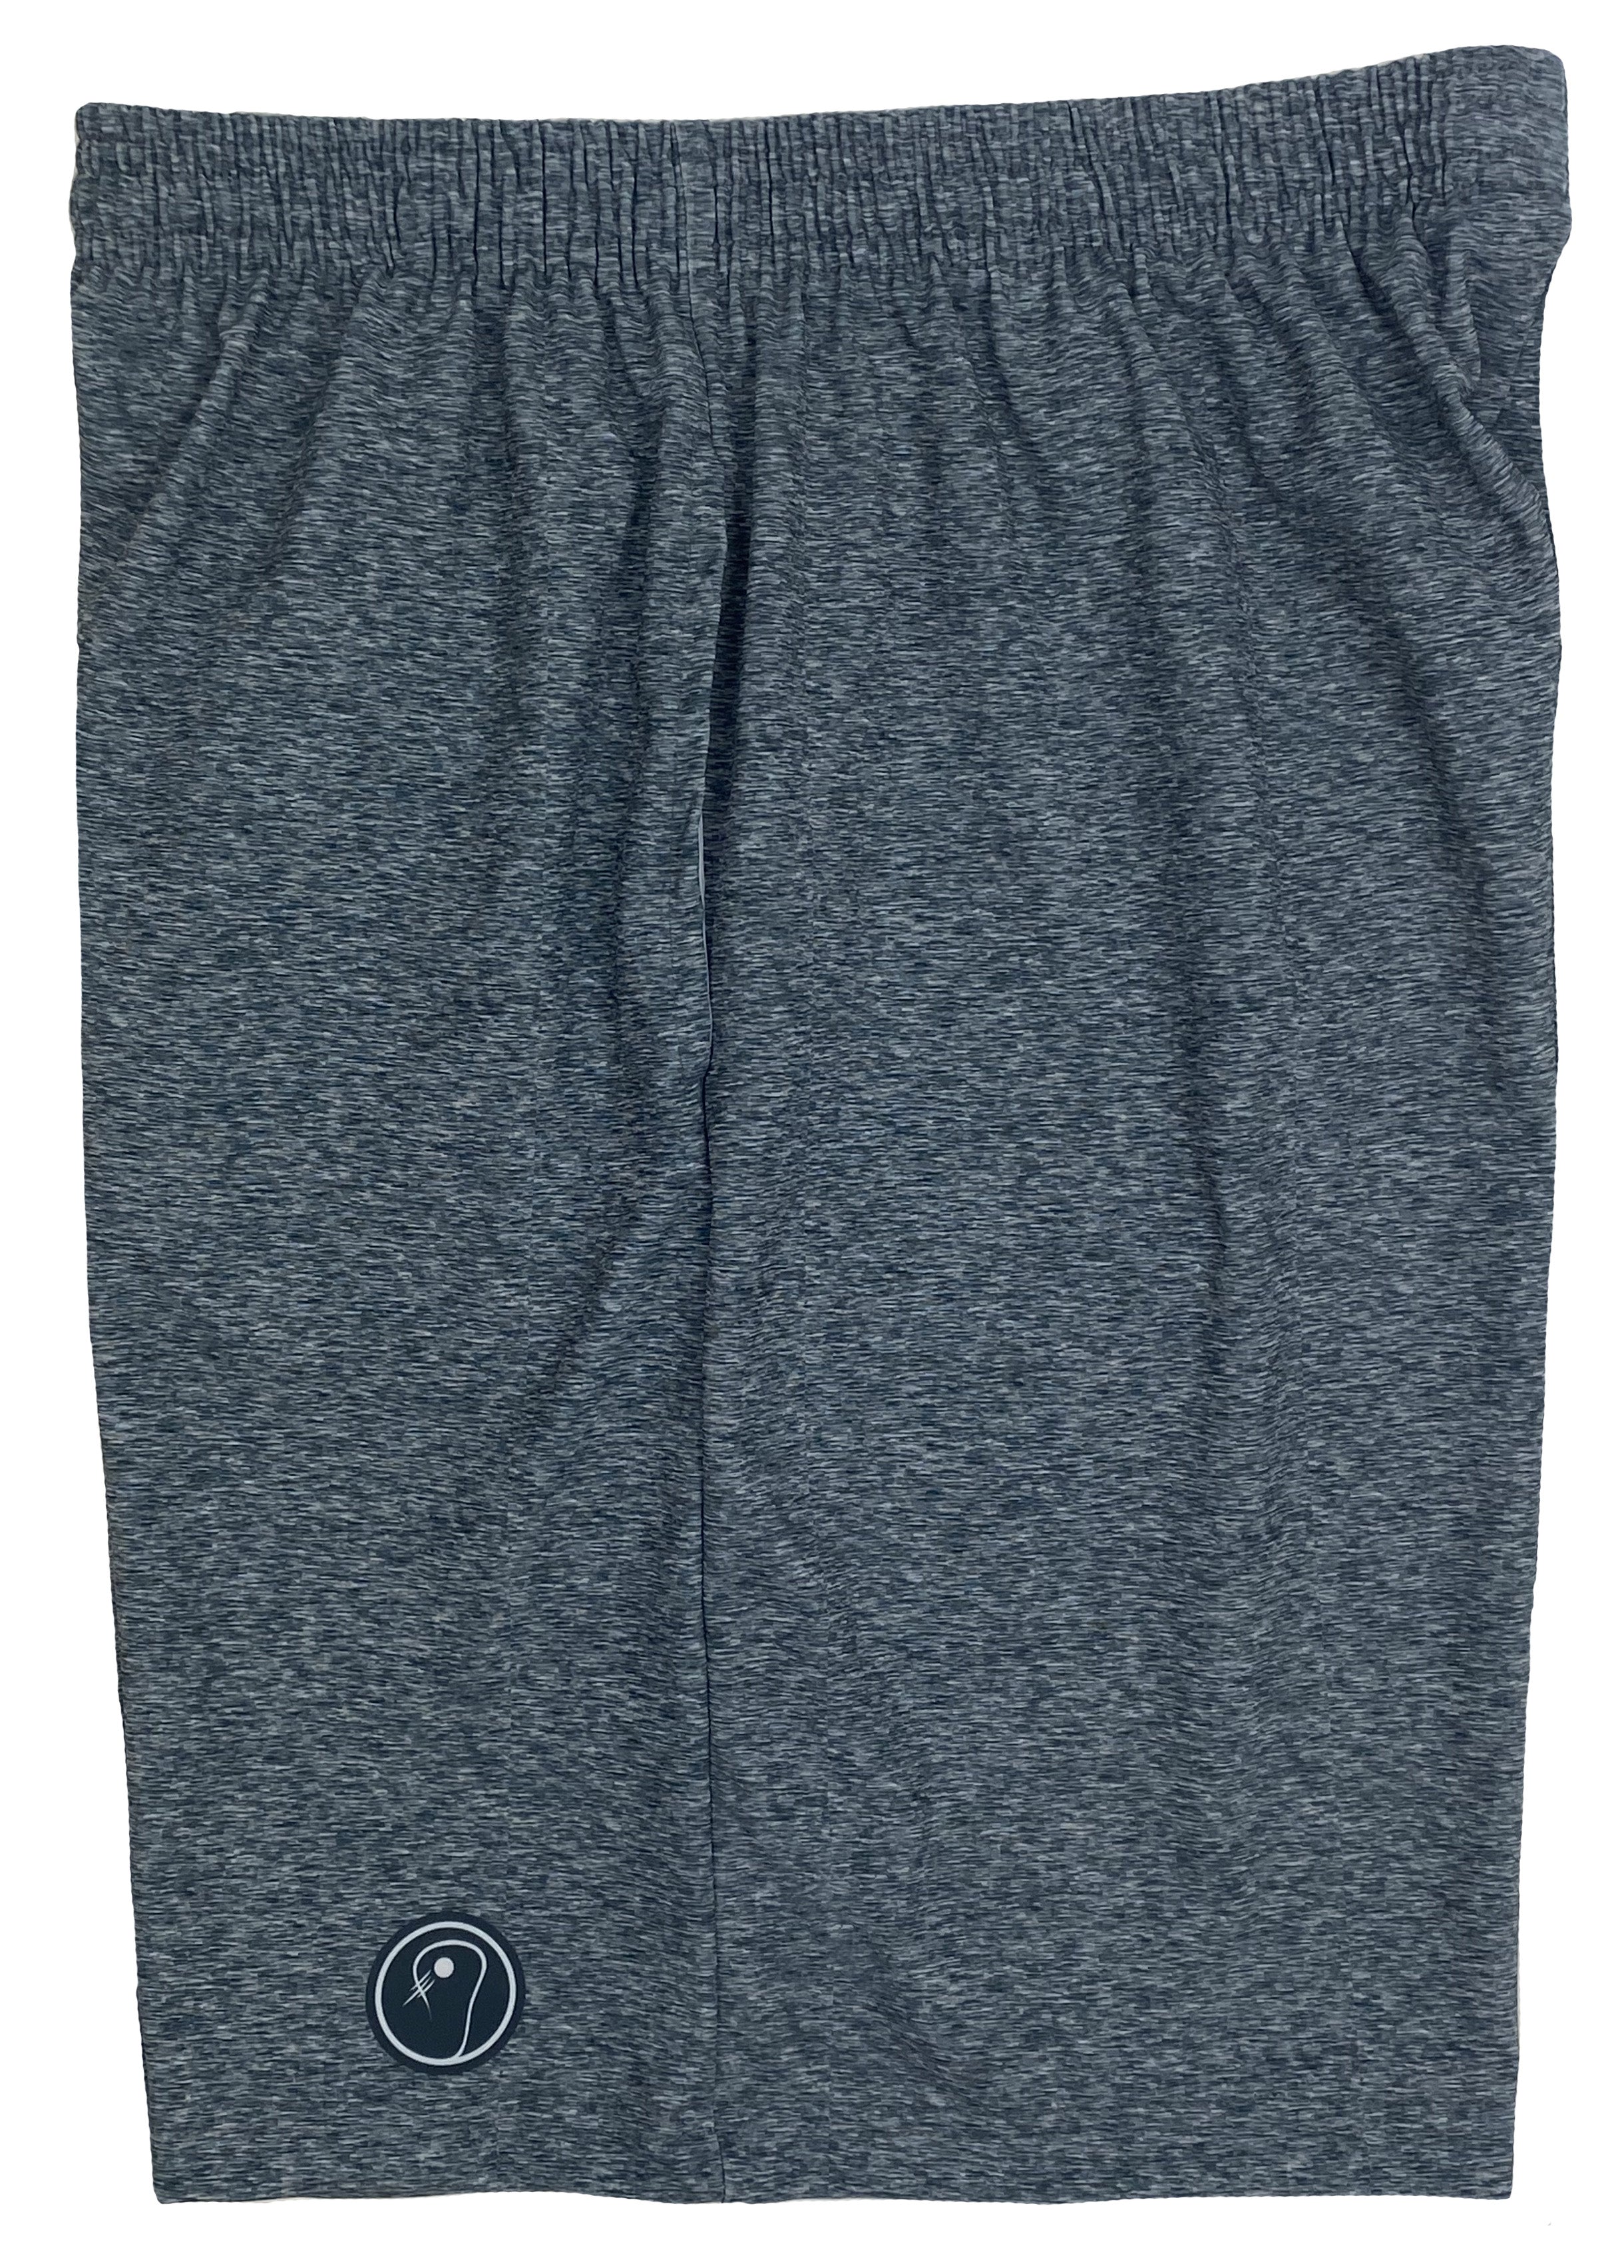 Mens Graphic Lacrosse Shorts - Gray Heather